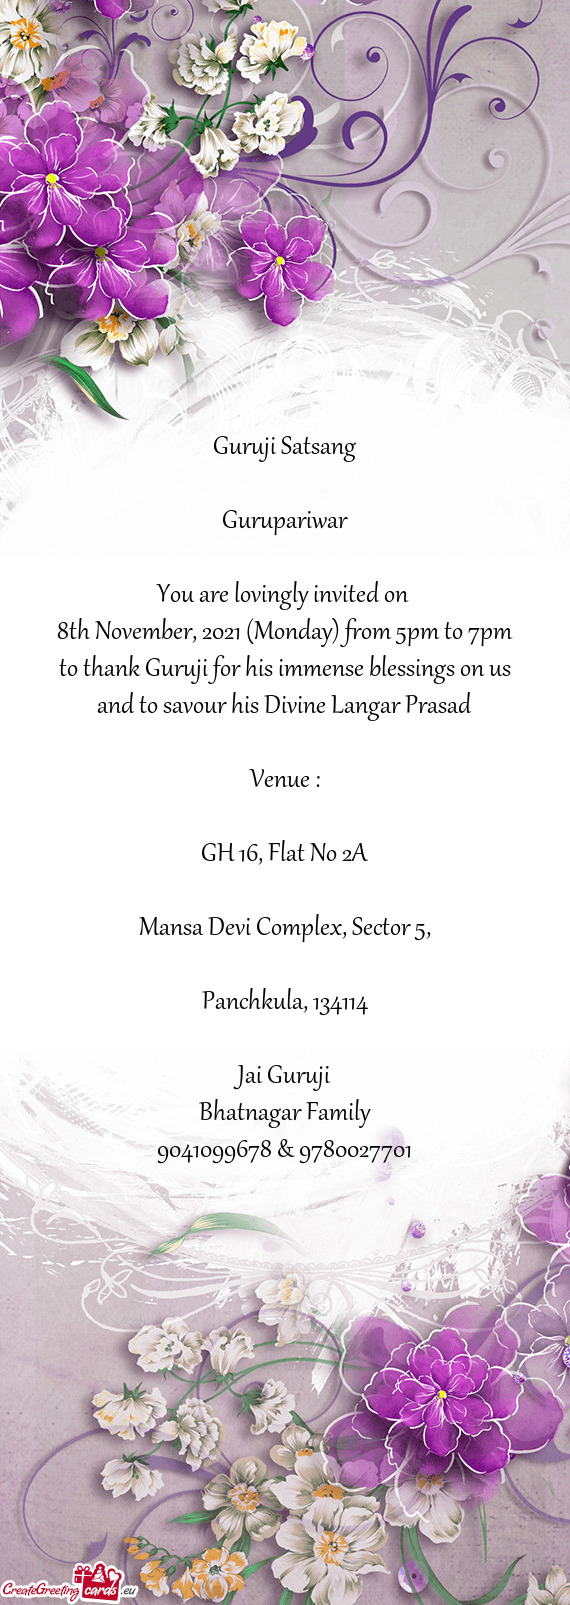 8th November, 2021 (Monday) from 5pm to 7pm